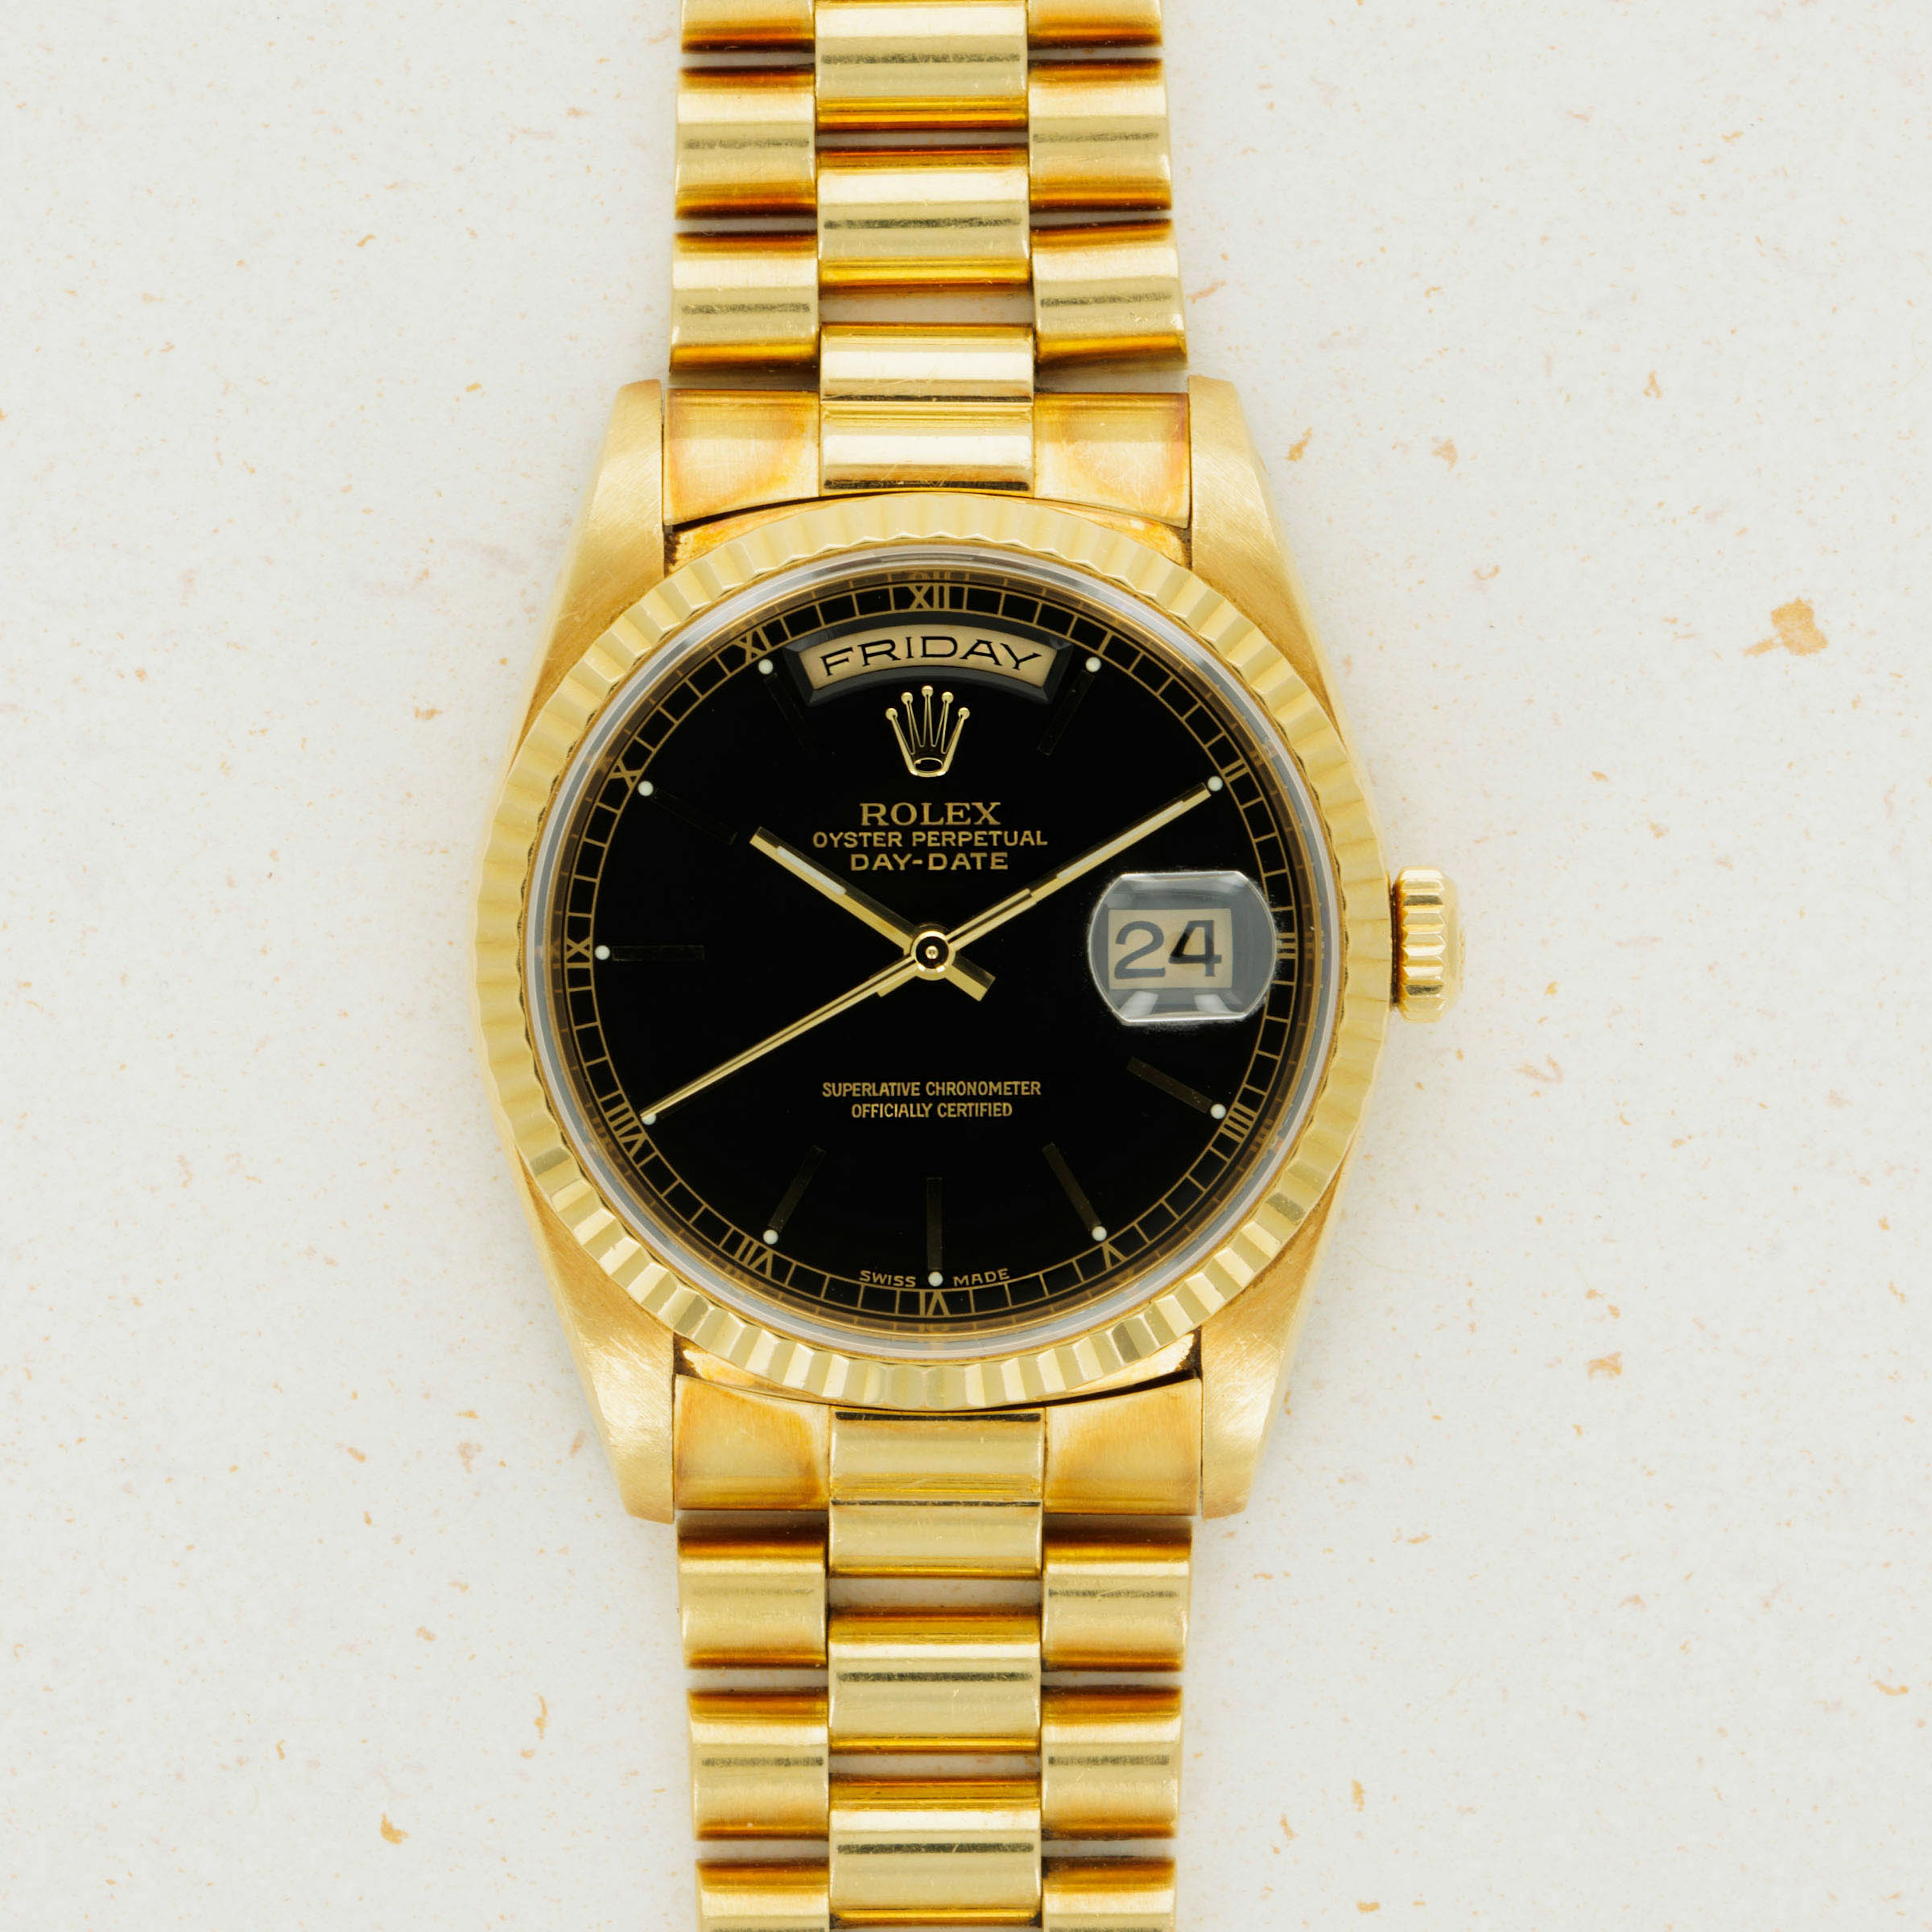 Thumbnail for Rolex Day-Date 18238 Black Dial